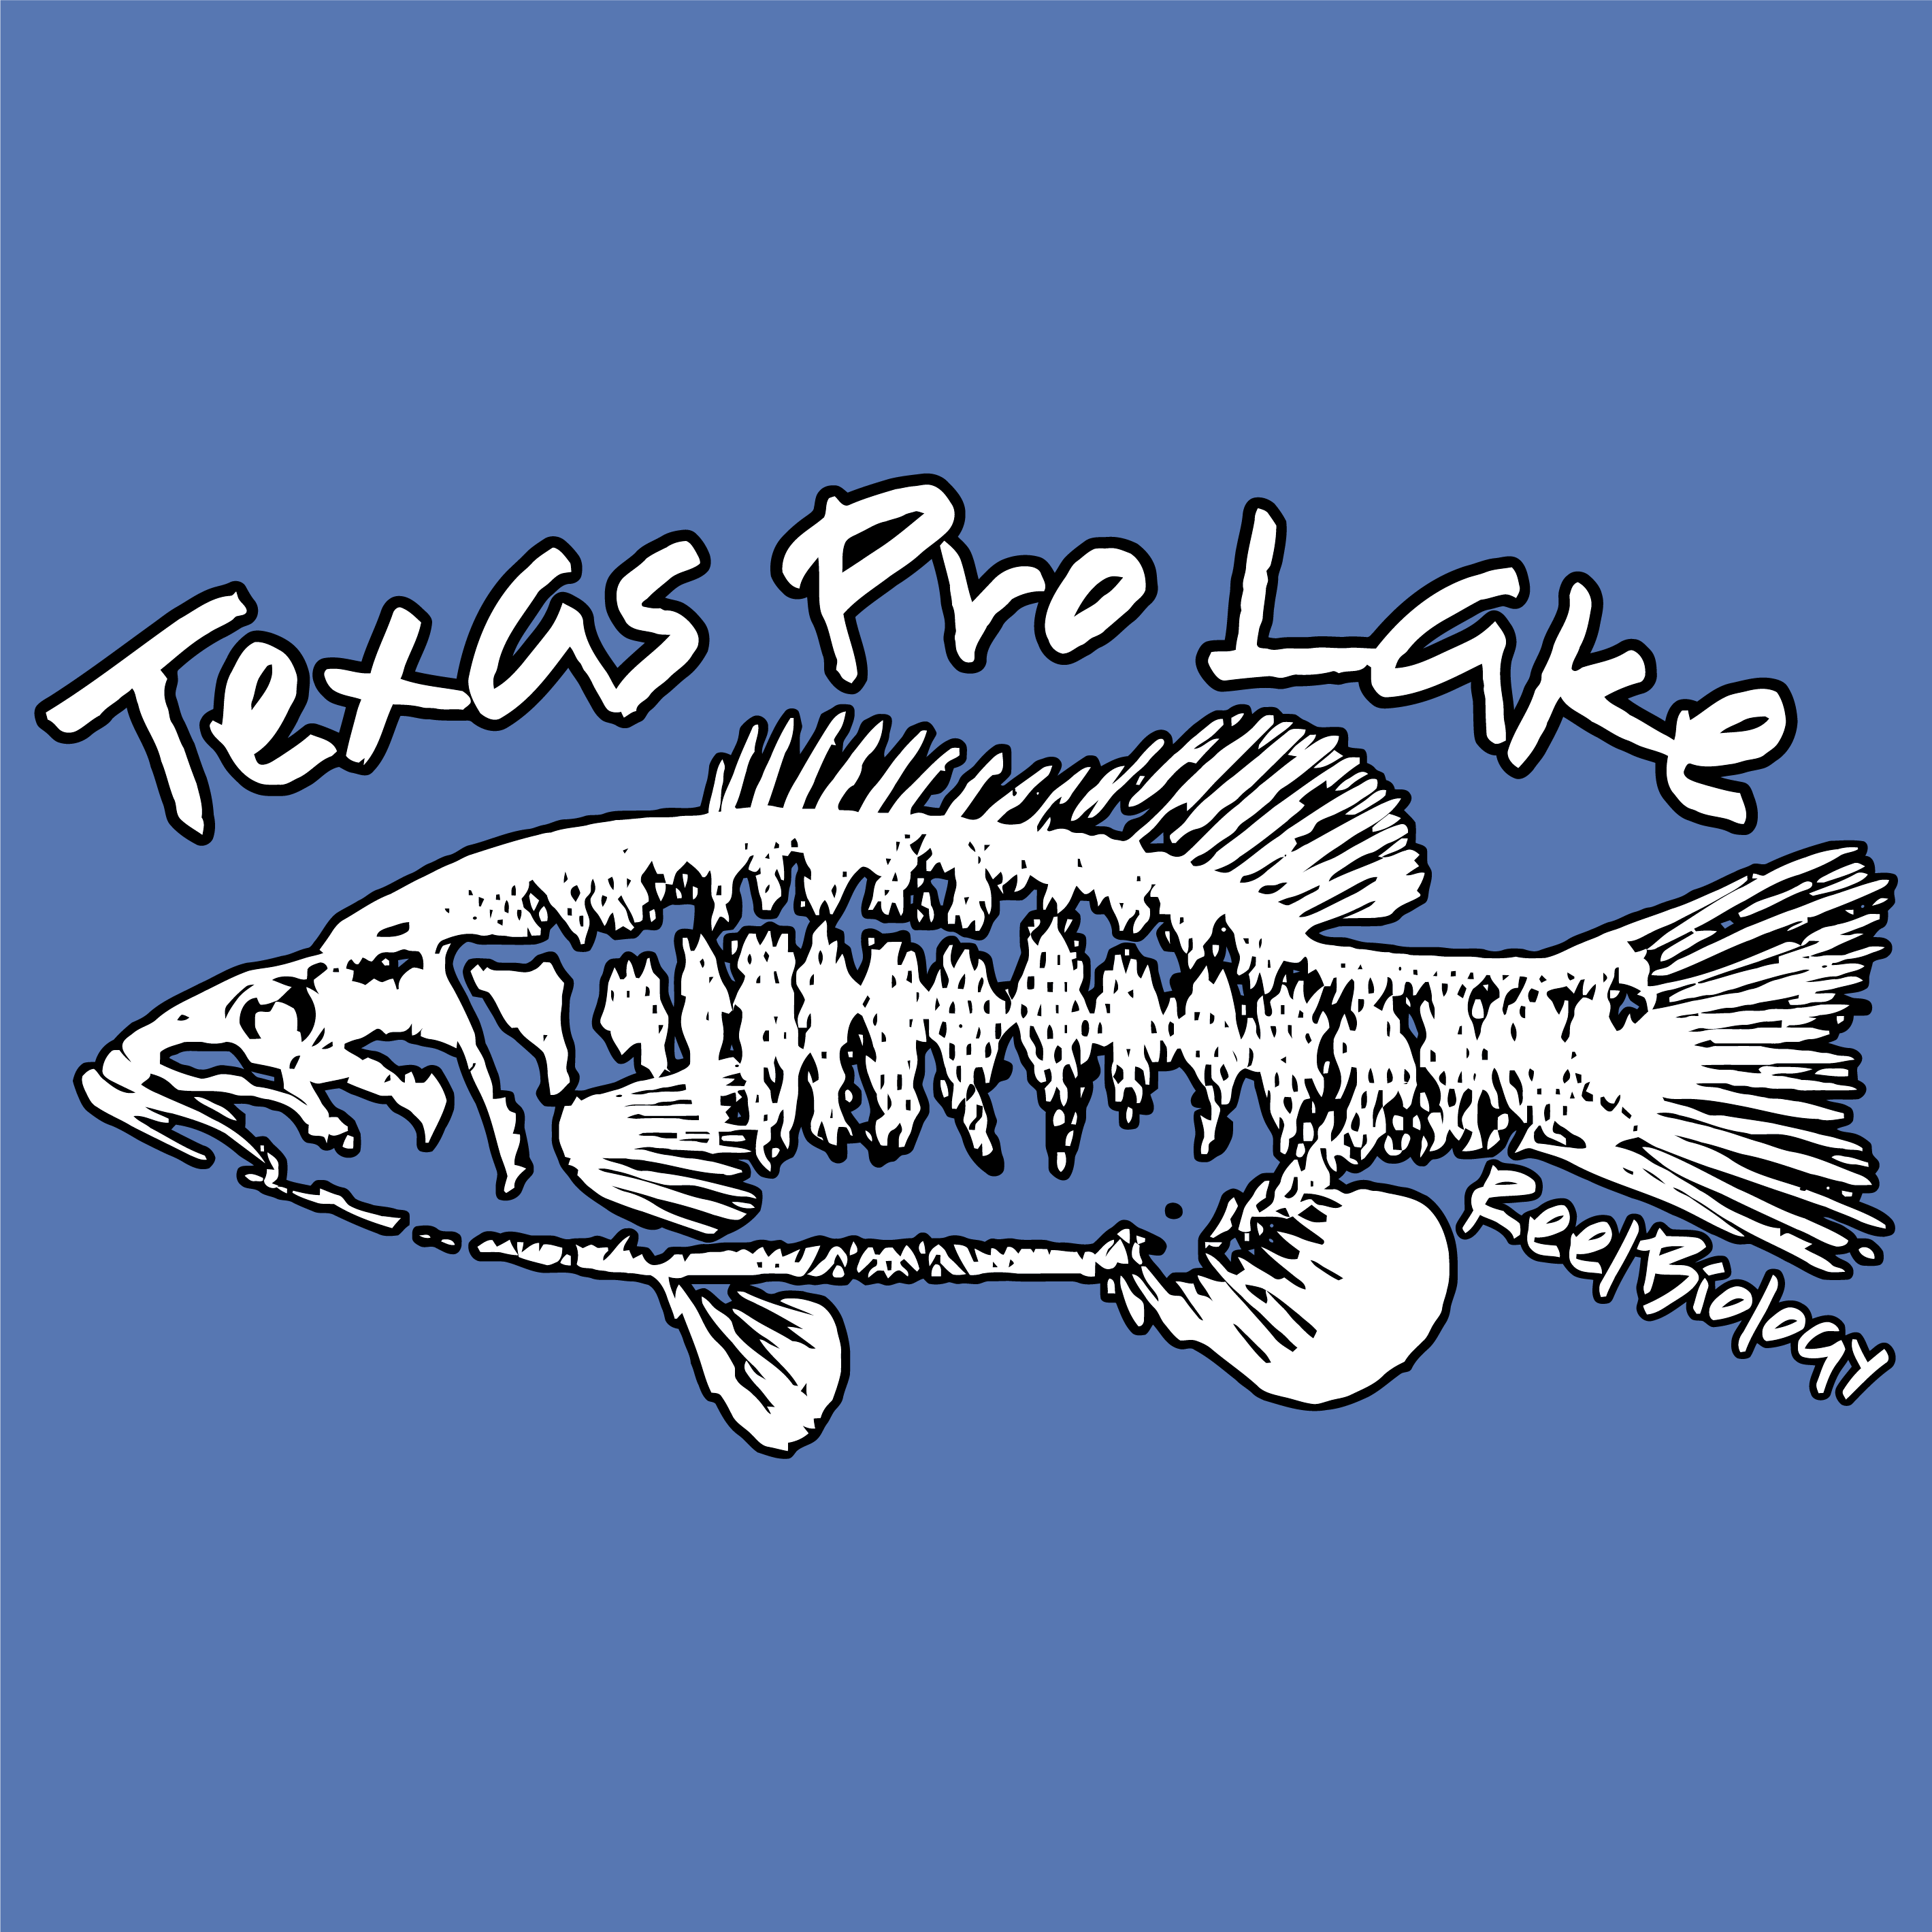 Texas Pro Lake Management Annual Fundraiser - #REELBIOLOGY shirt design - zoomed